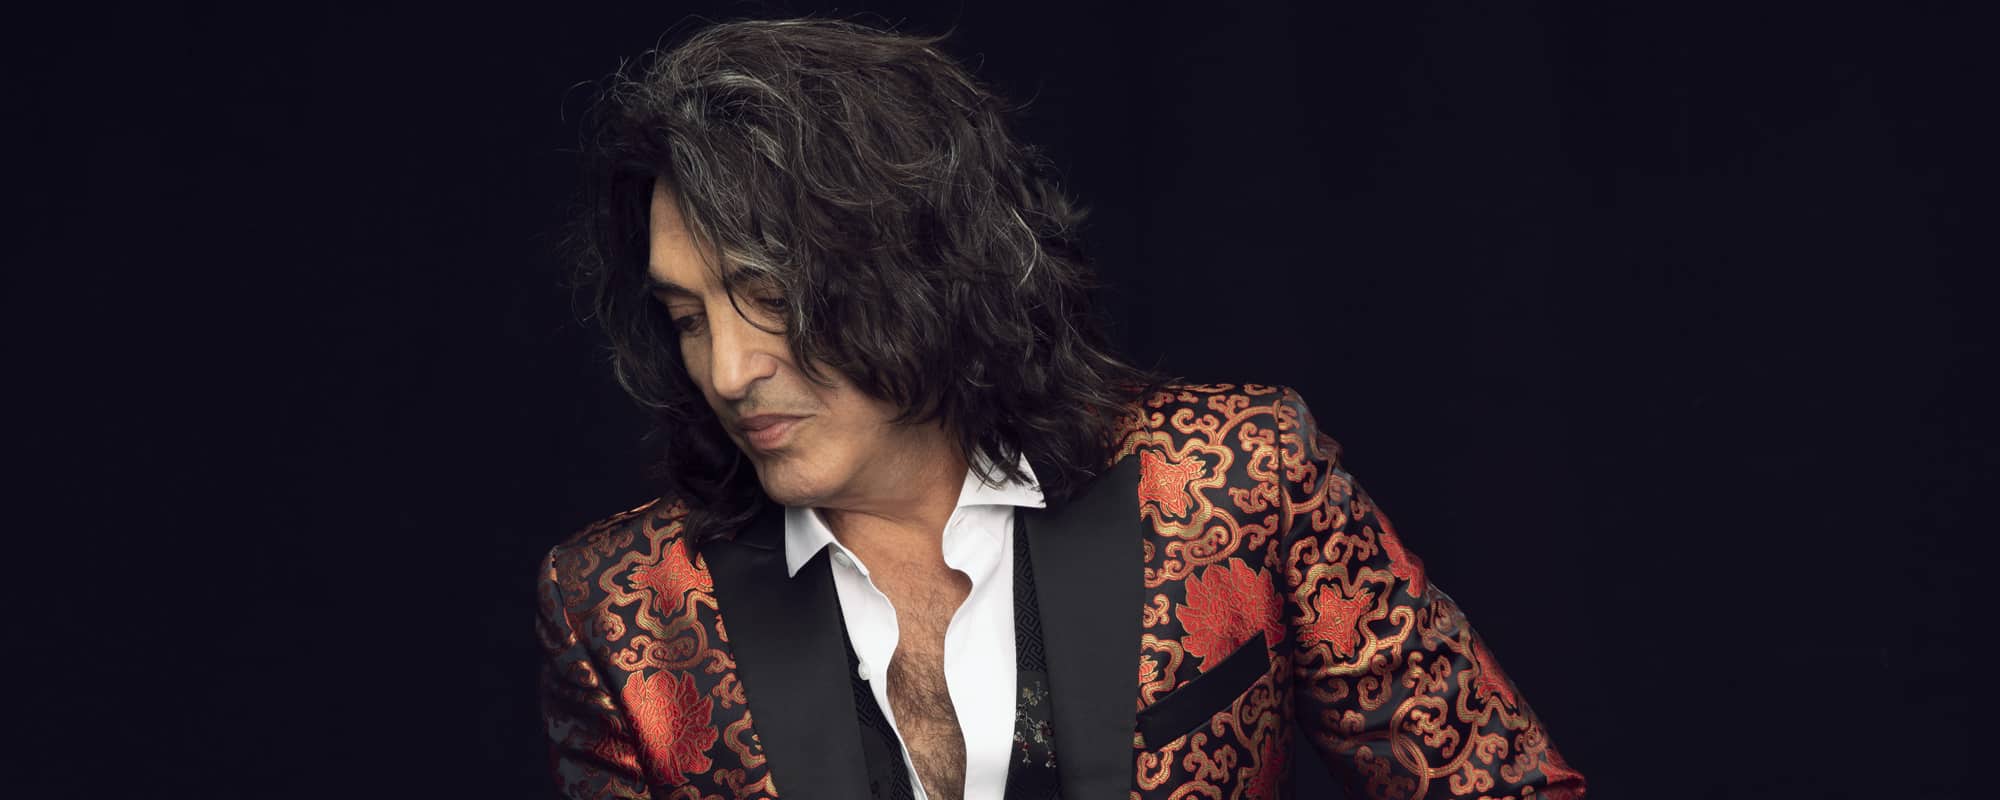 KISS’ Paul Stanley’s Net Worth, From Pyrotechnic Performances to Authorship